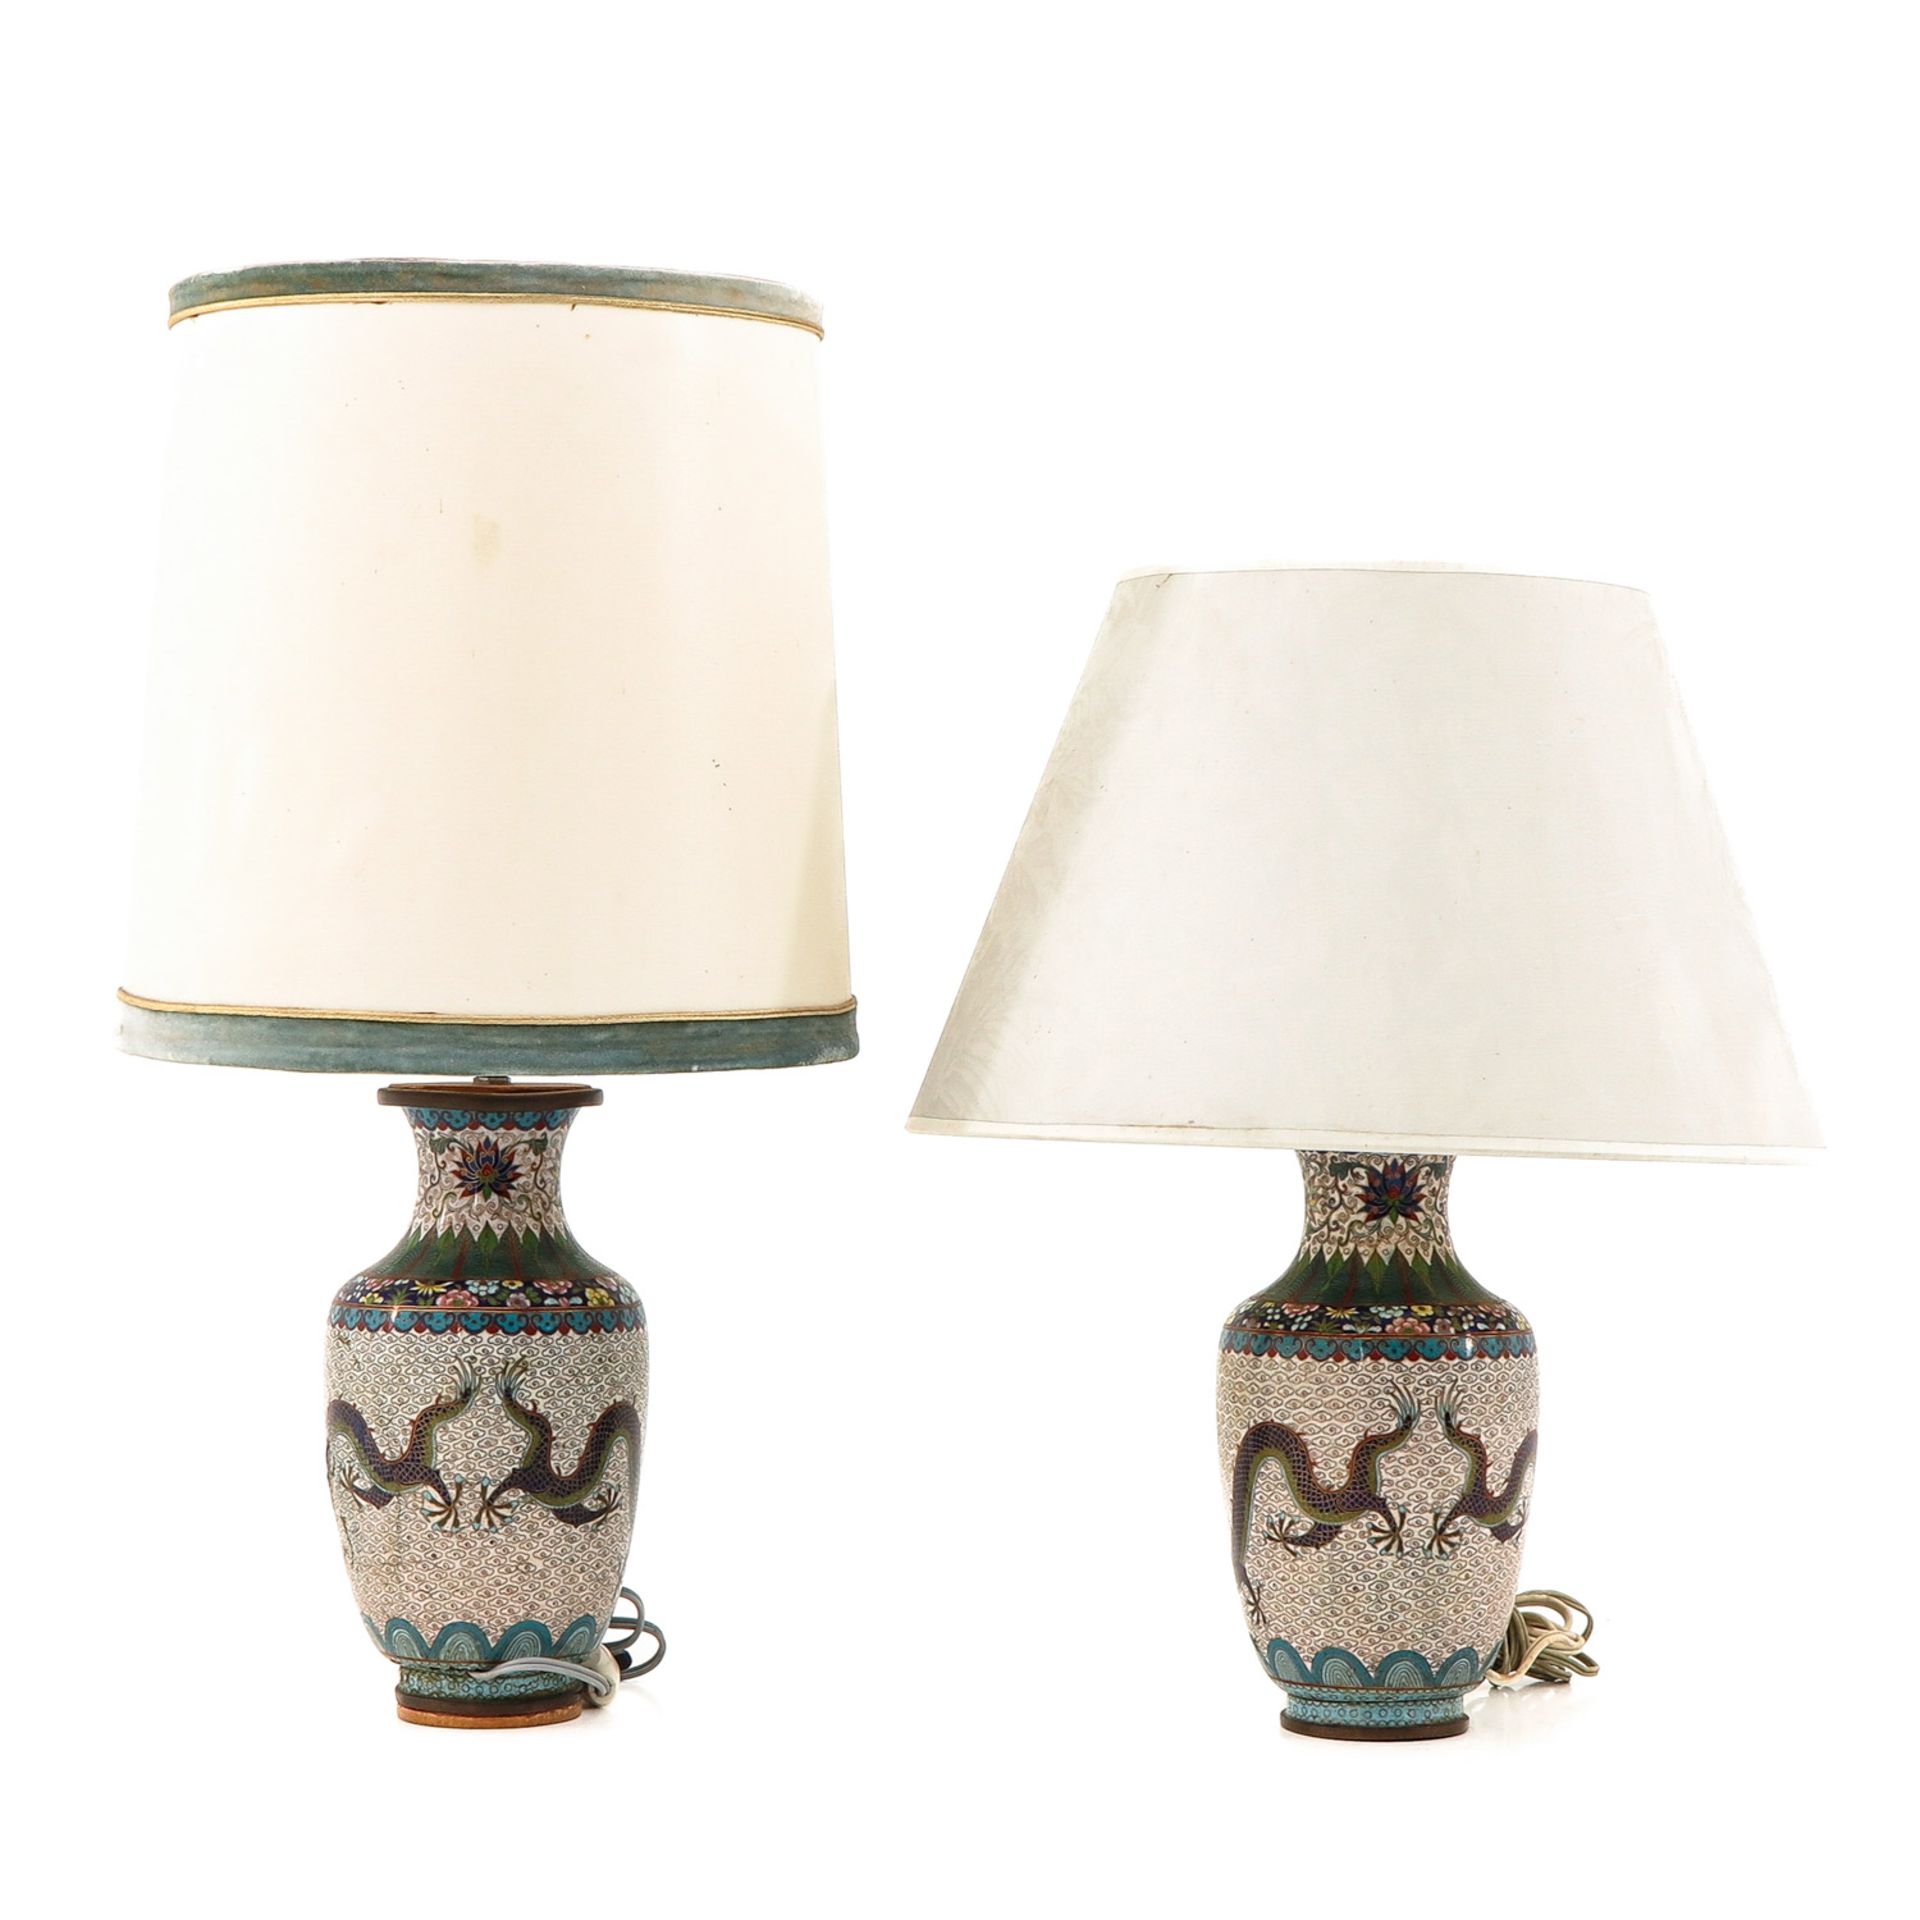 A Pair of Cloisonne Lamps - Image 3 of 9